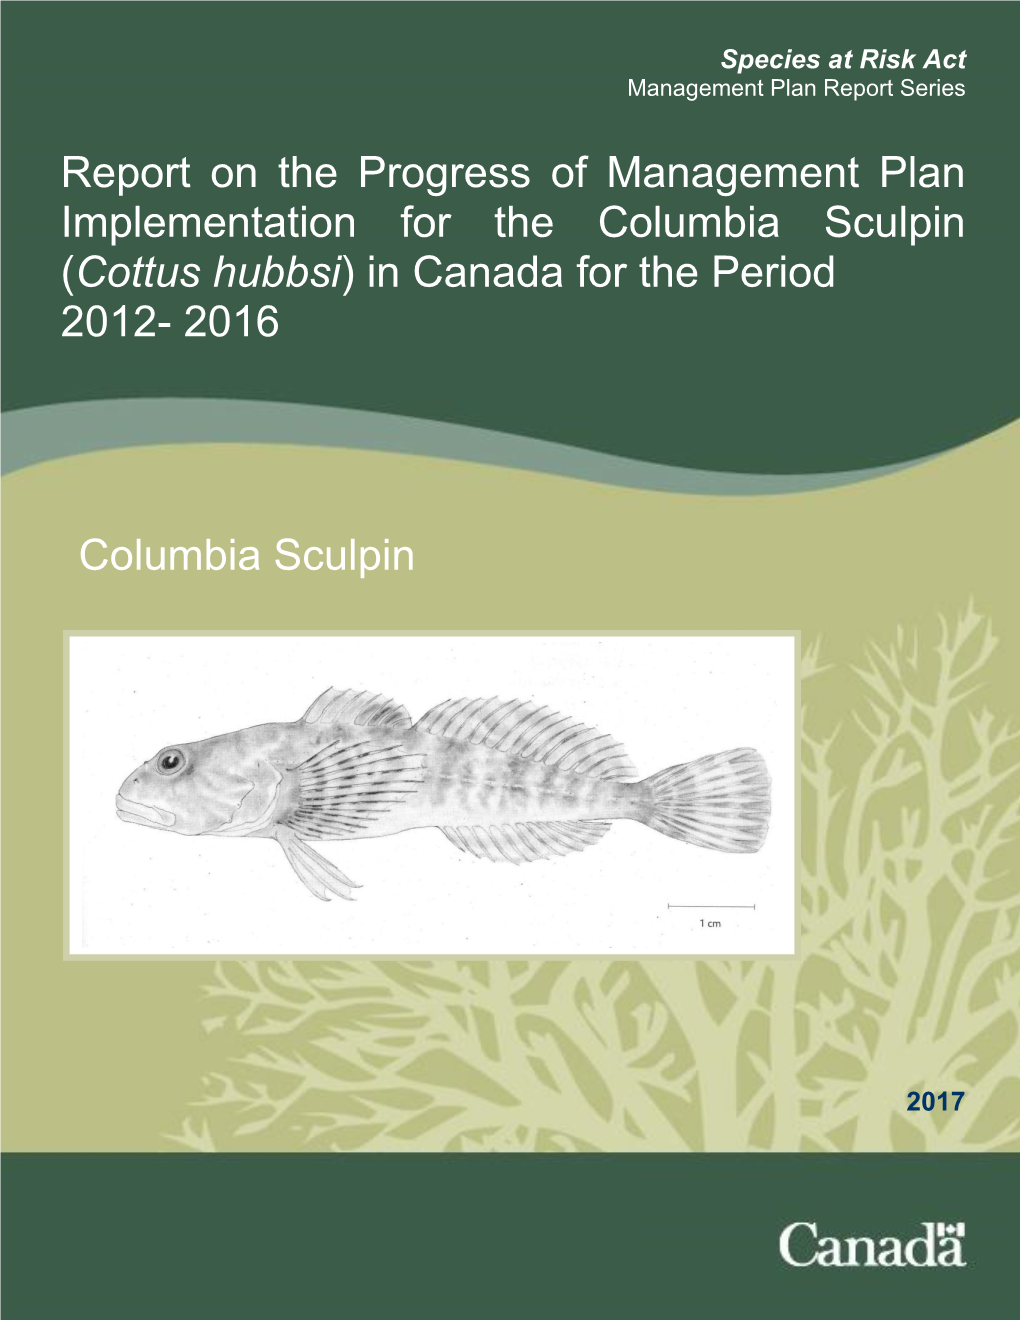 Cottus Hubbsi) in Canada for the Period 2012- 2016